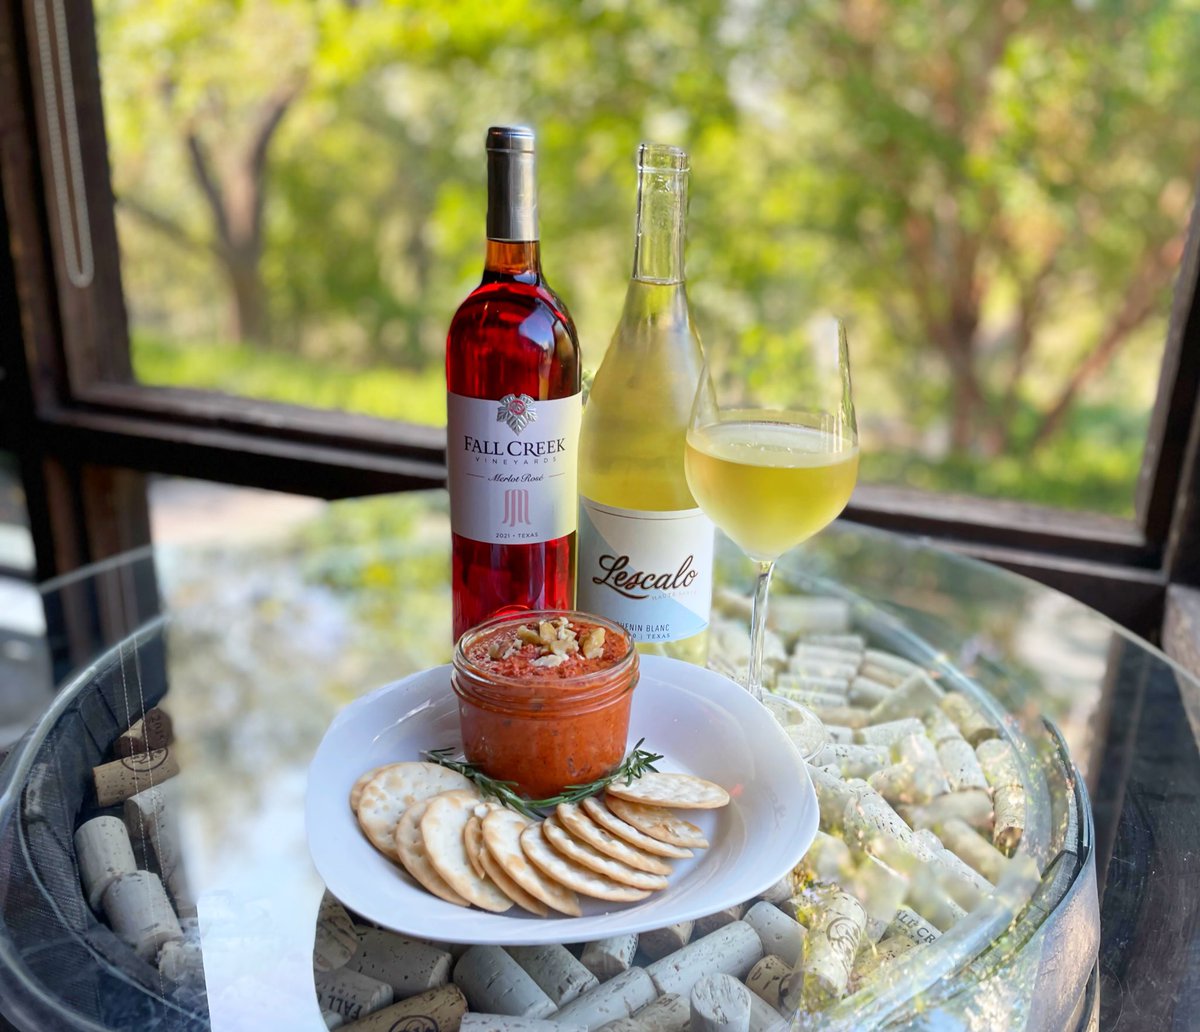 On your next visit to our Driftwood tasting room, be sure to try our newest wine pairing item—Muhammara! Made by a local chef in Austin, this spicy dish pairs well with our white and rosé wines. 

#txwine #texaswinery #texashillcountry